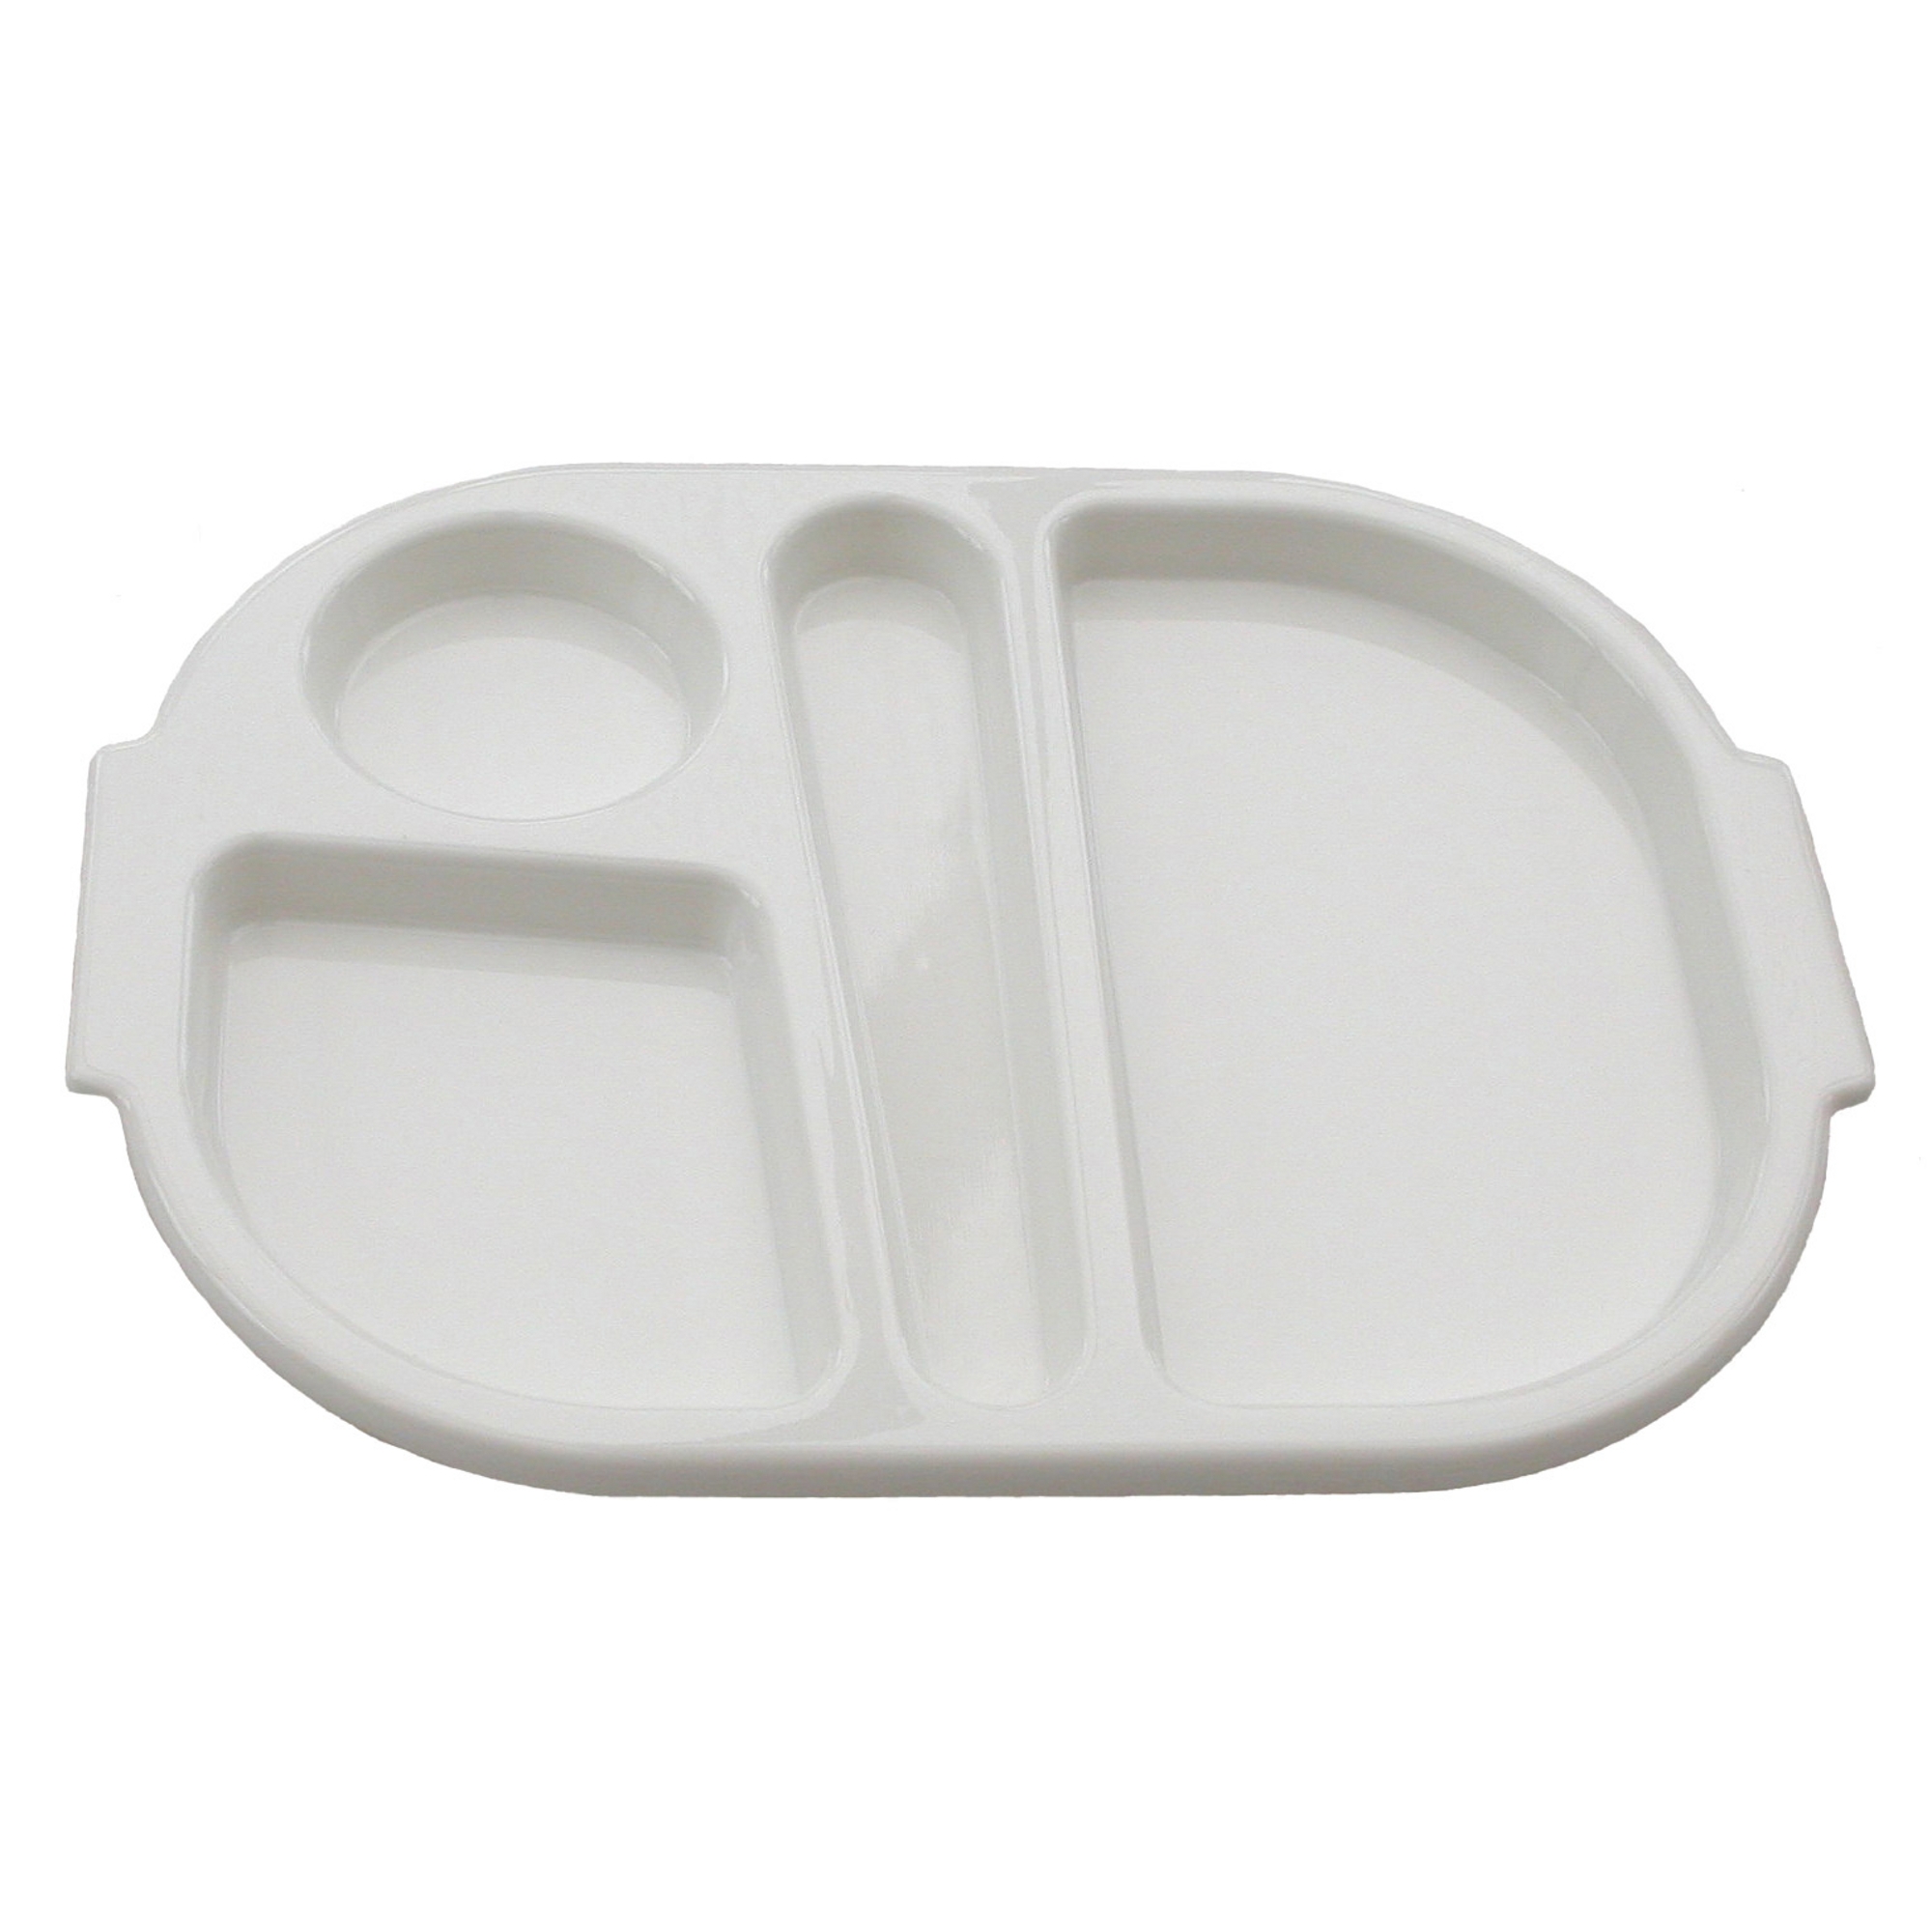 Harfield Meal Trays - Small - White